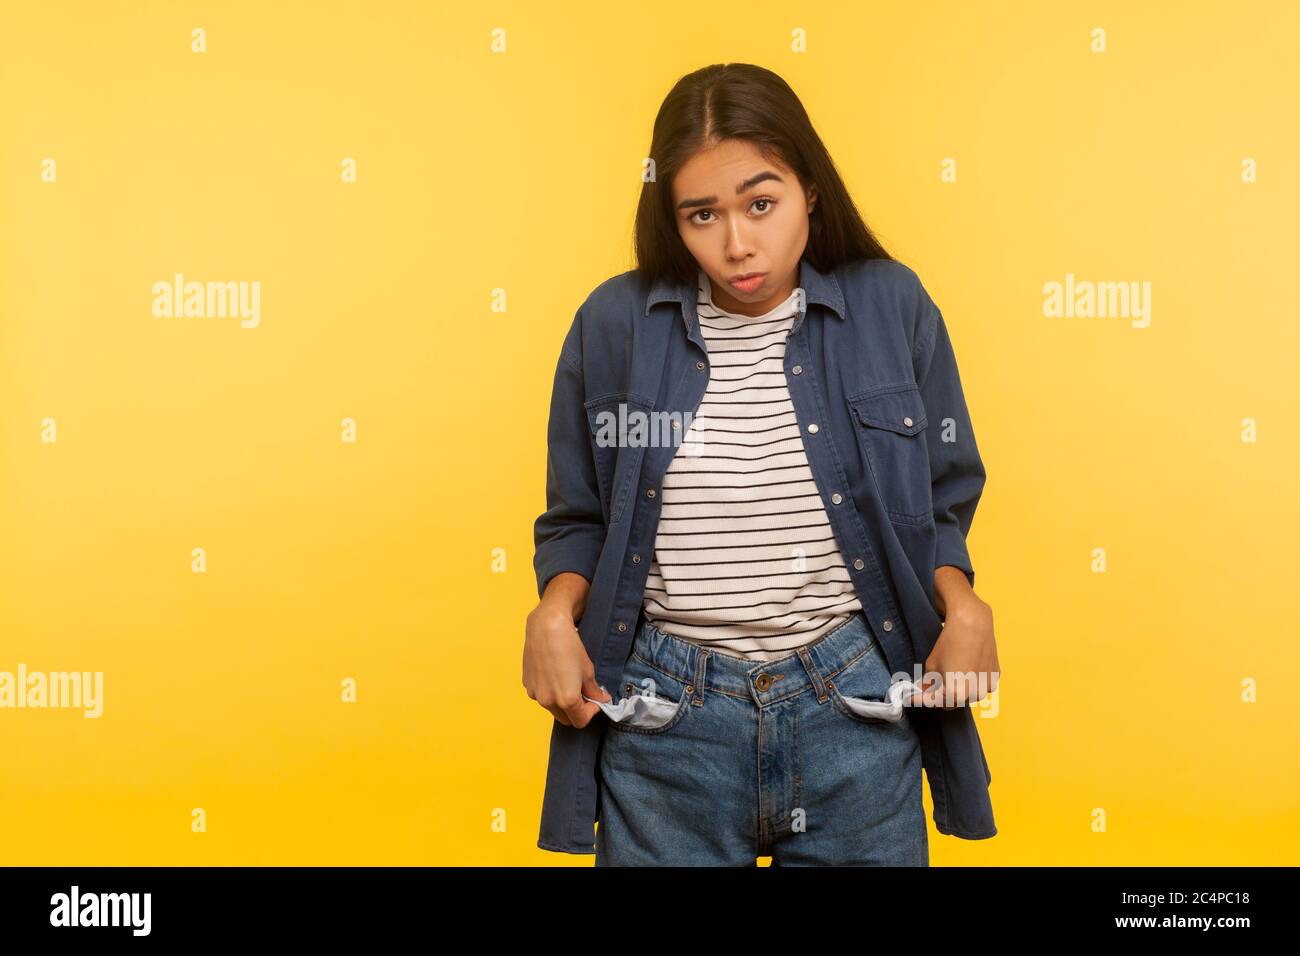 I'm bankrupt! Unhappy poor girl in jeans outfit turning empty pockets inside out and looking frustrated by overspend, lack of money, financial crisis. Stock Photo